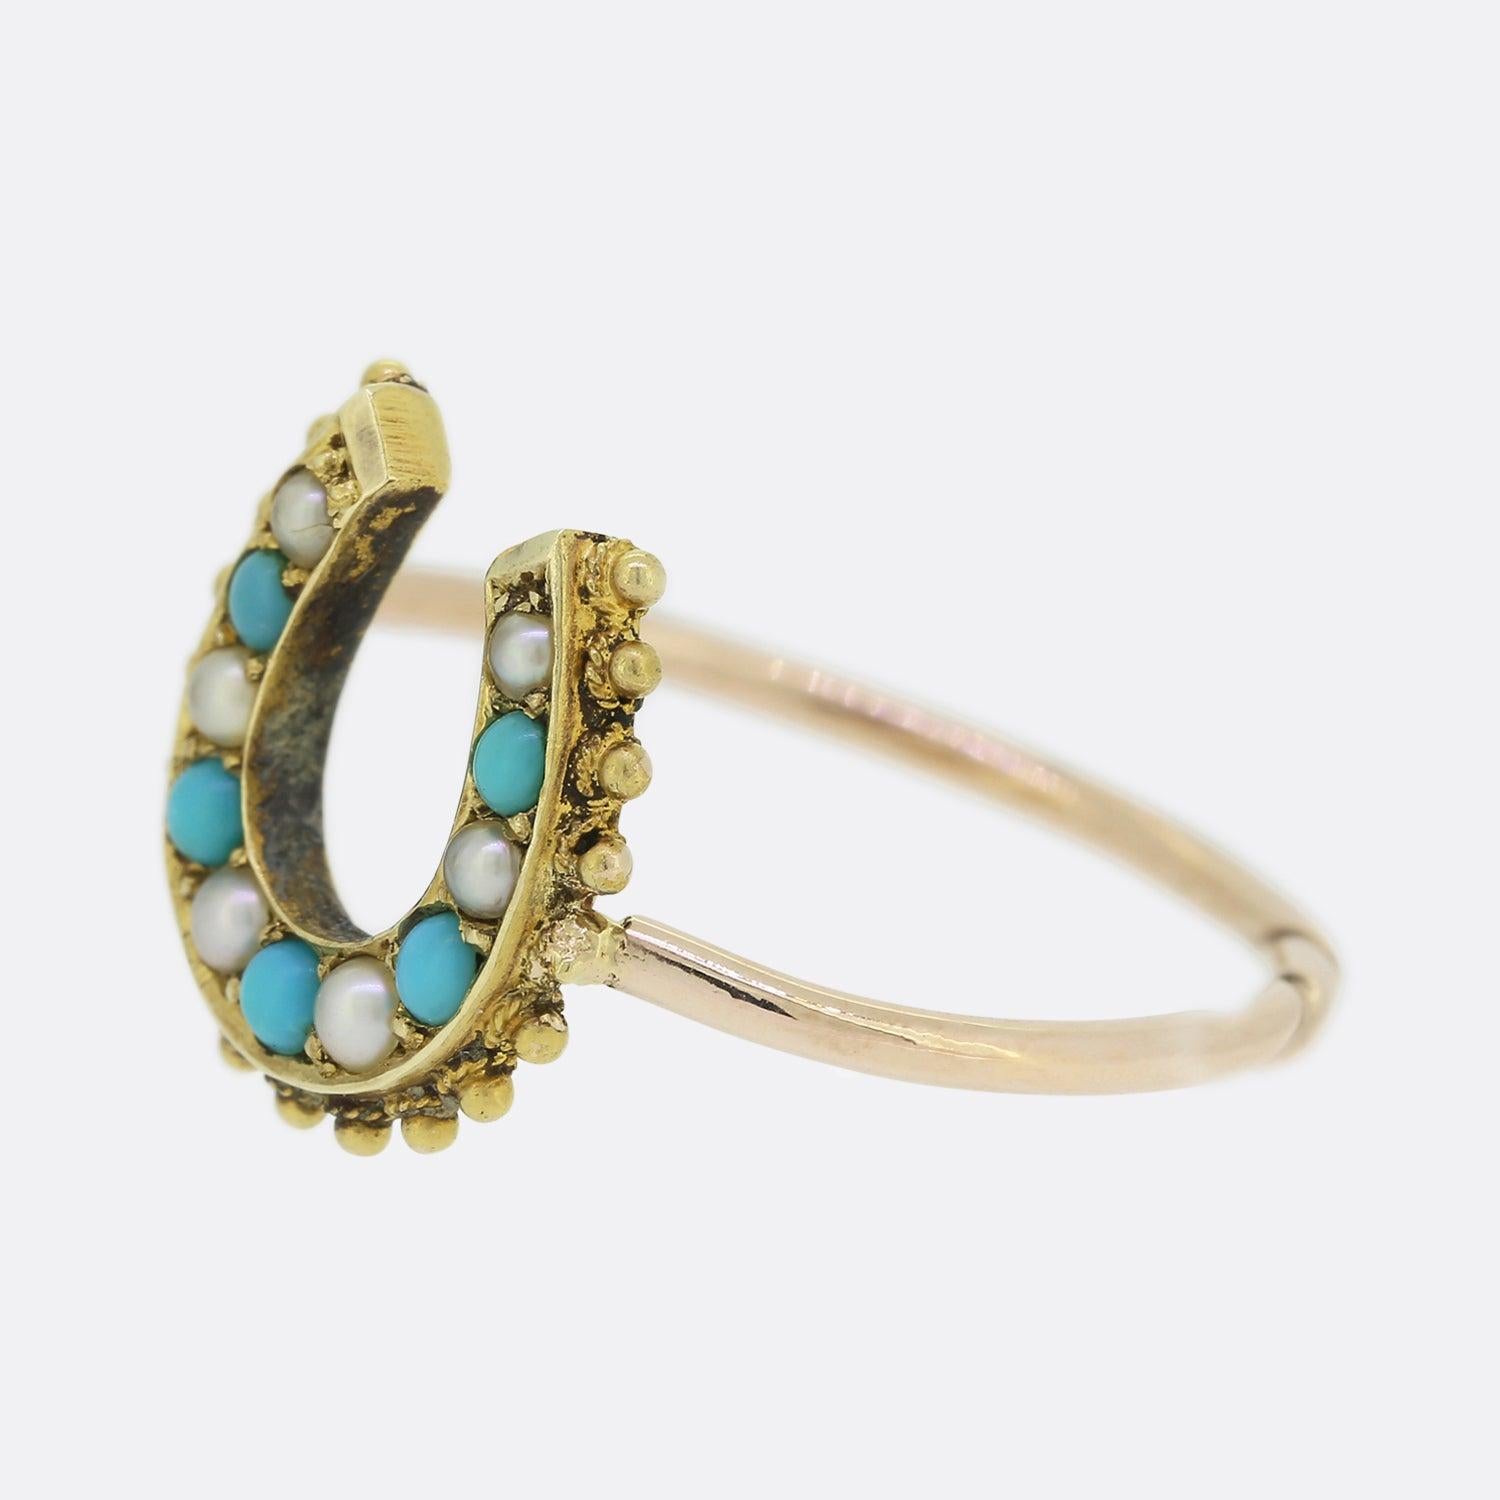 Here we have a fabulous turquoise and pearl ring originally dating back to the Victorian era. The face has been crafted into the shape of a lucky horseshoe, a common symbol associated with jewellery of the time. This particular horseshoe showcases a